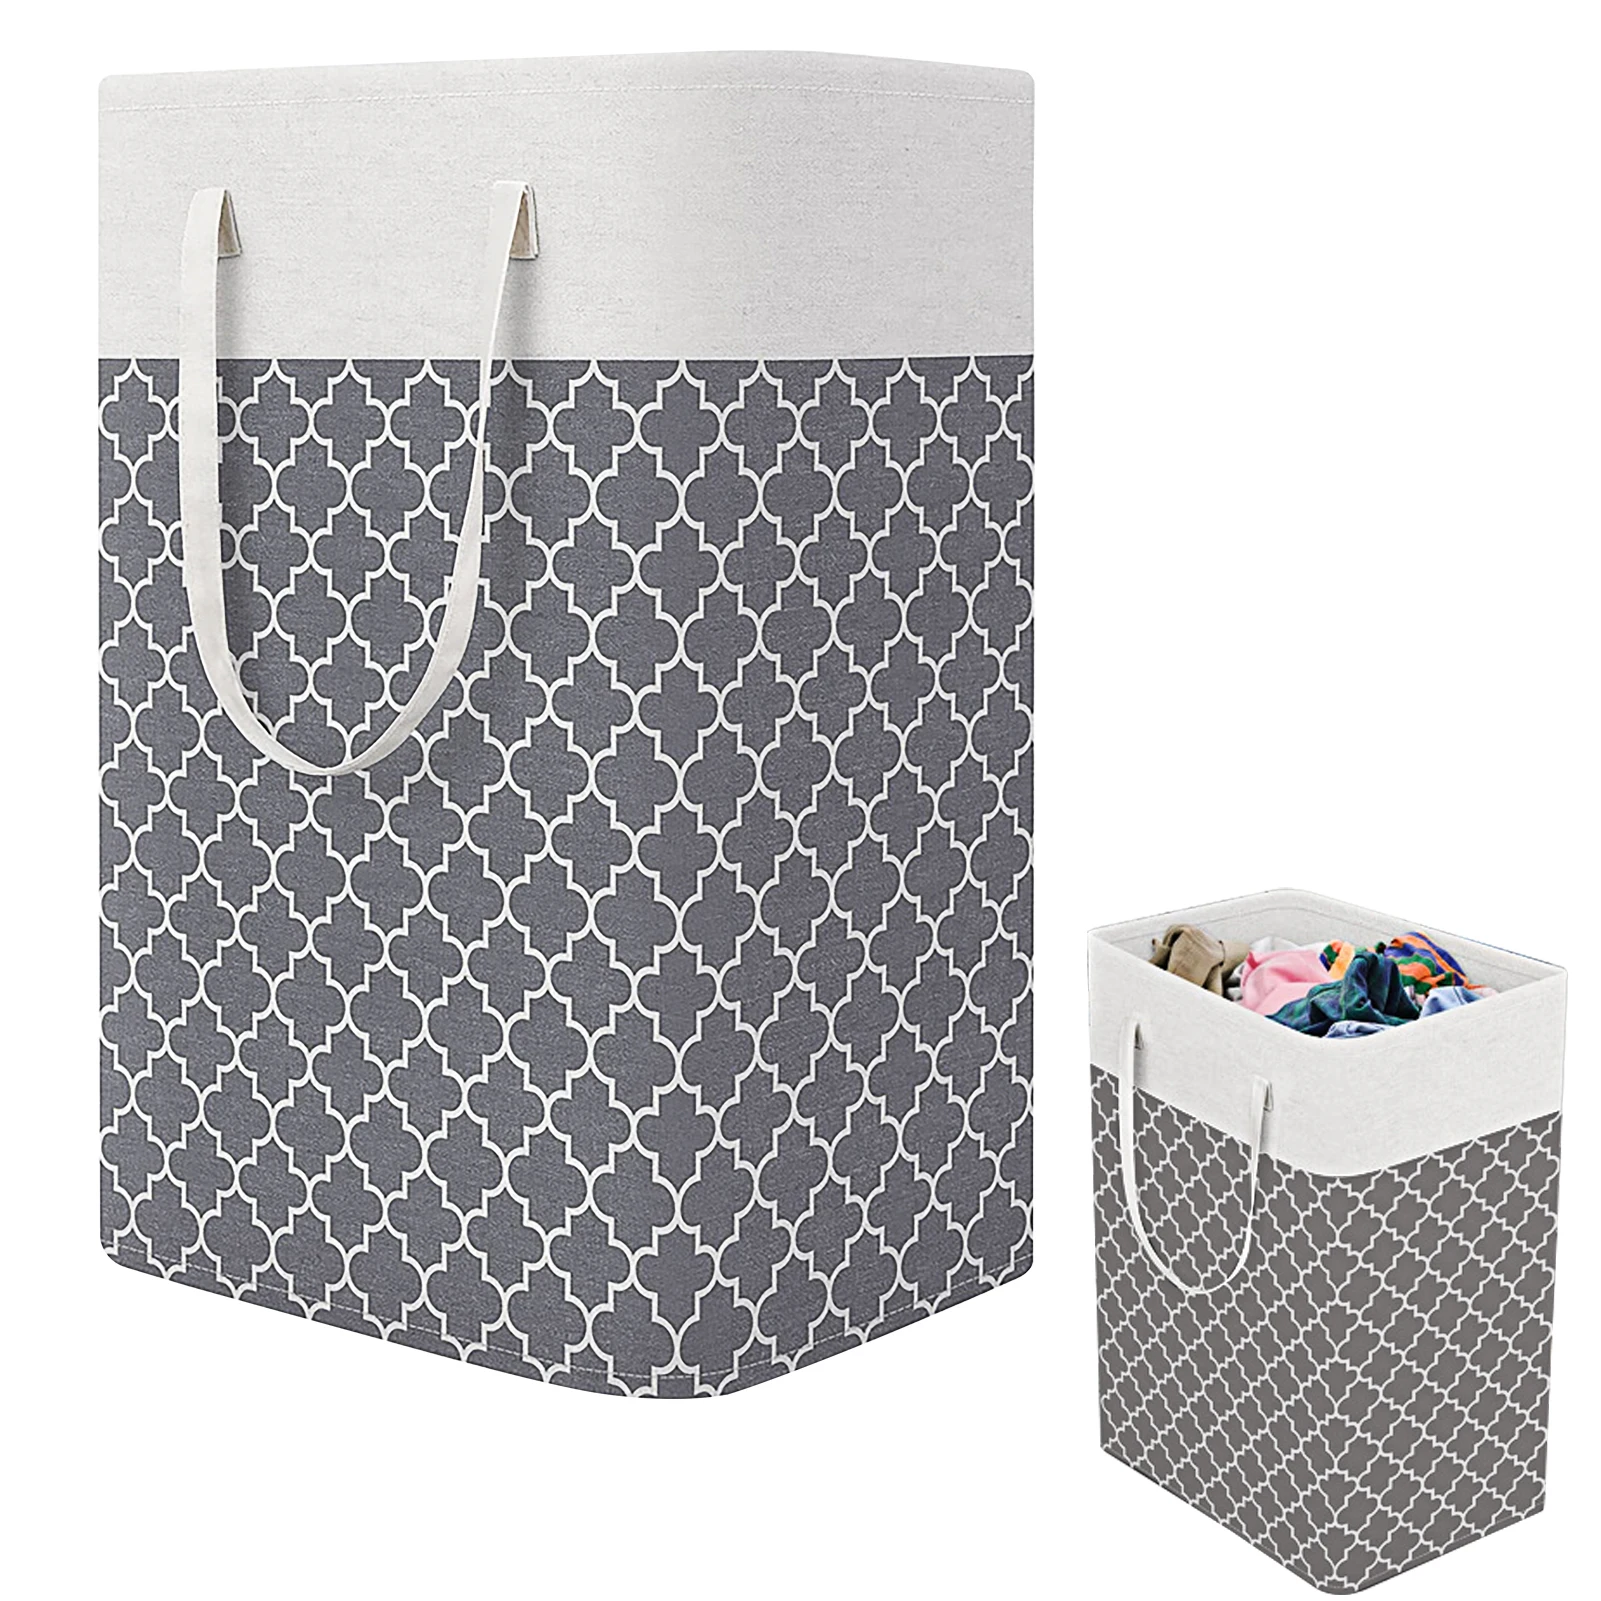 

Basket Home Laundry Hamper With Handle Cuboid Shape Easy Carry Lantern Prints Storing Clothes Toys Freestanding Collapsible